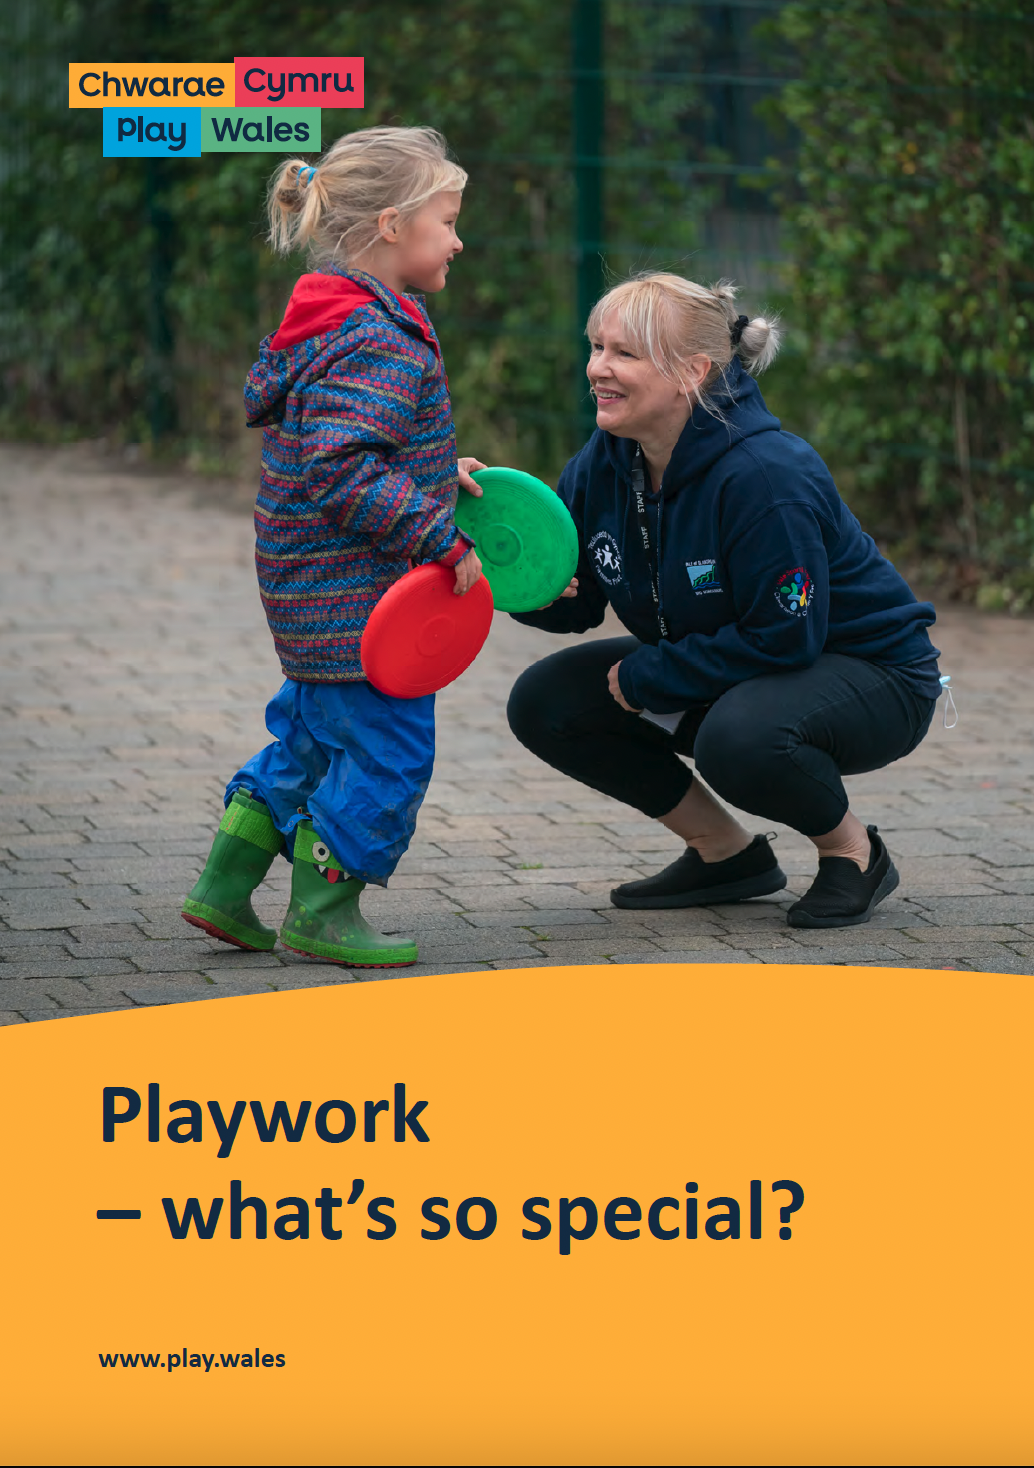 Playwork – what’s so special?